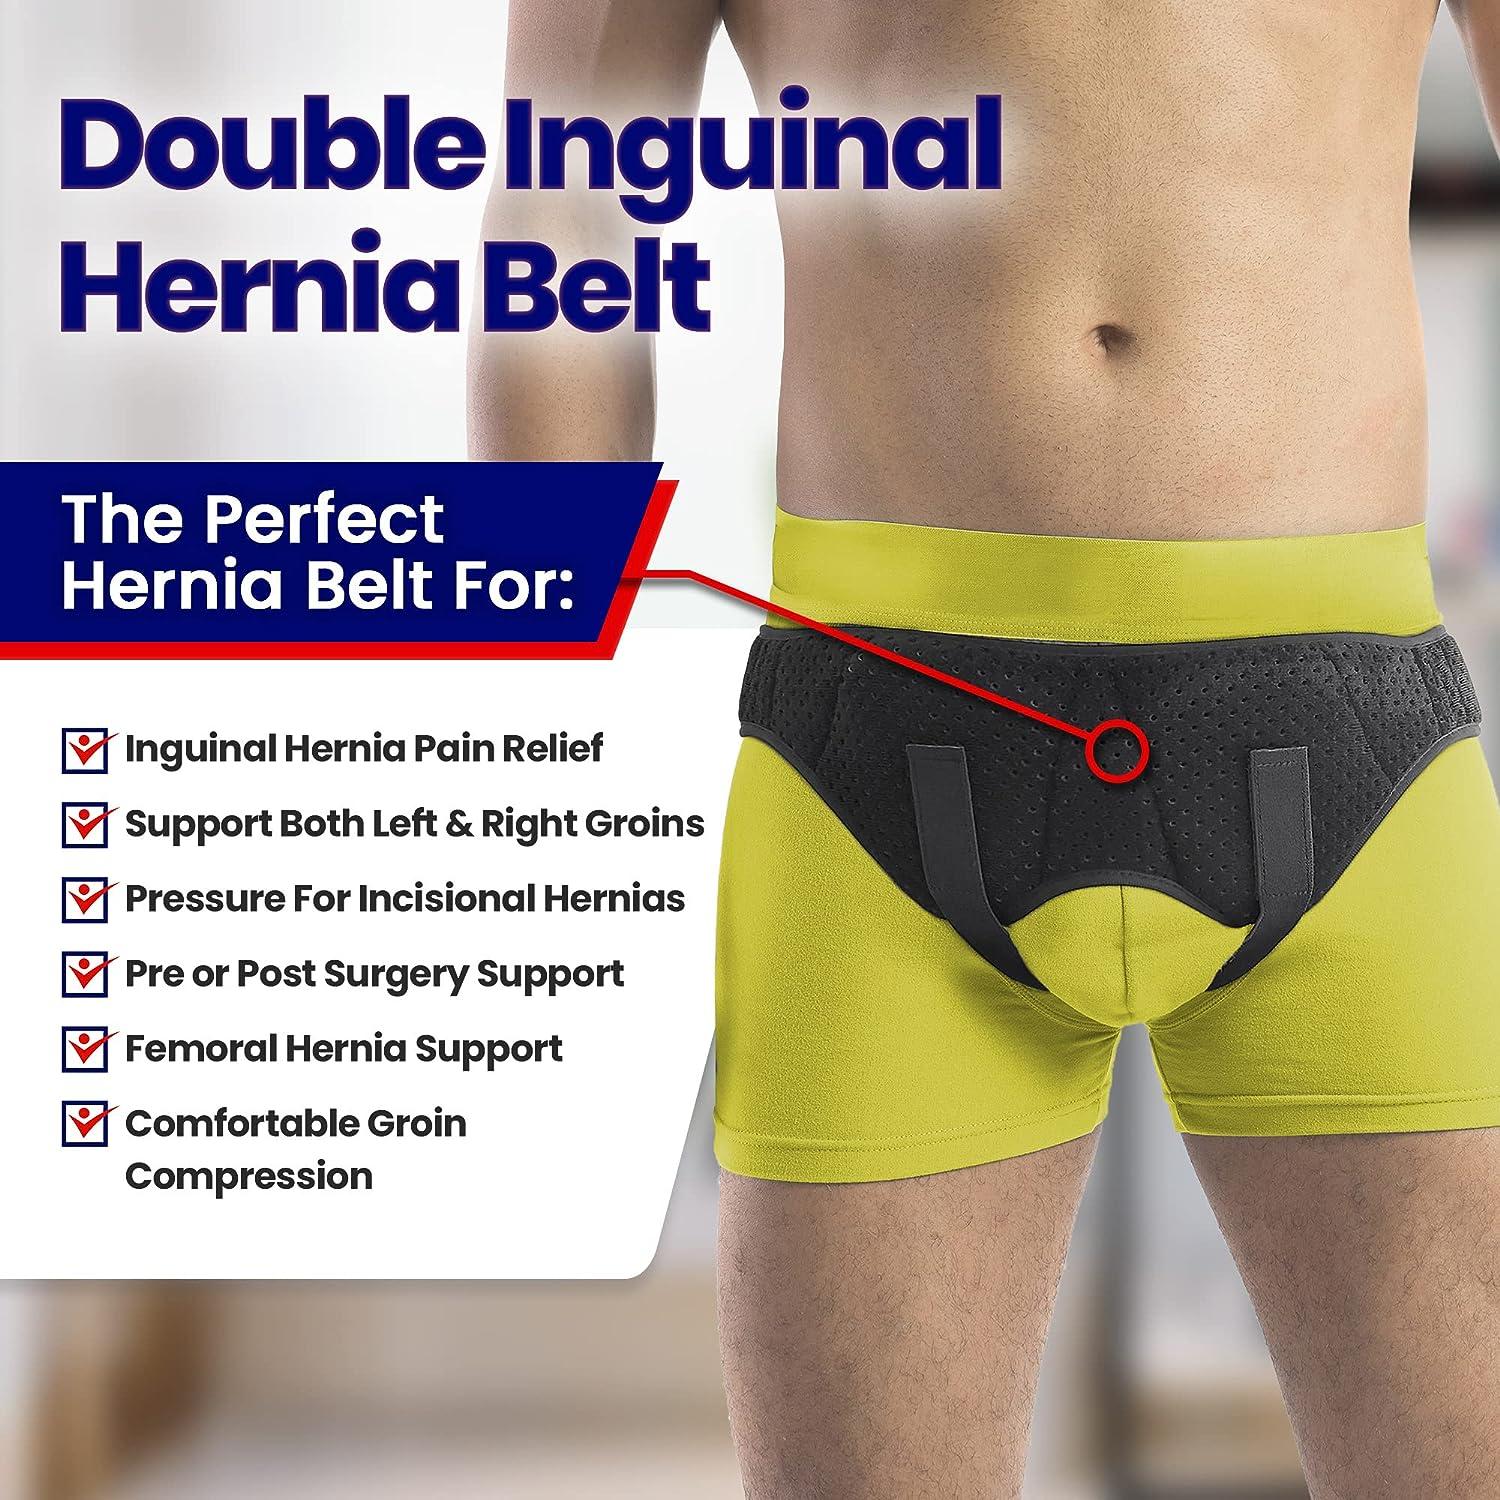 Hernia Belt for Women  Get Relief With the Inguinal Hernia Belt